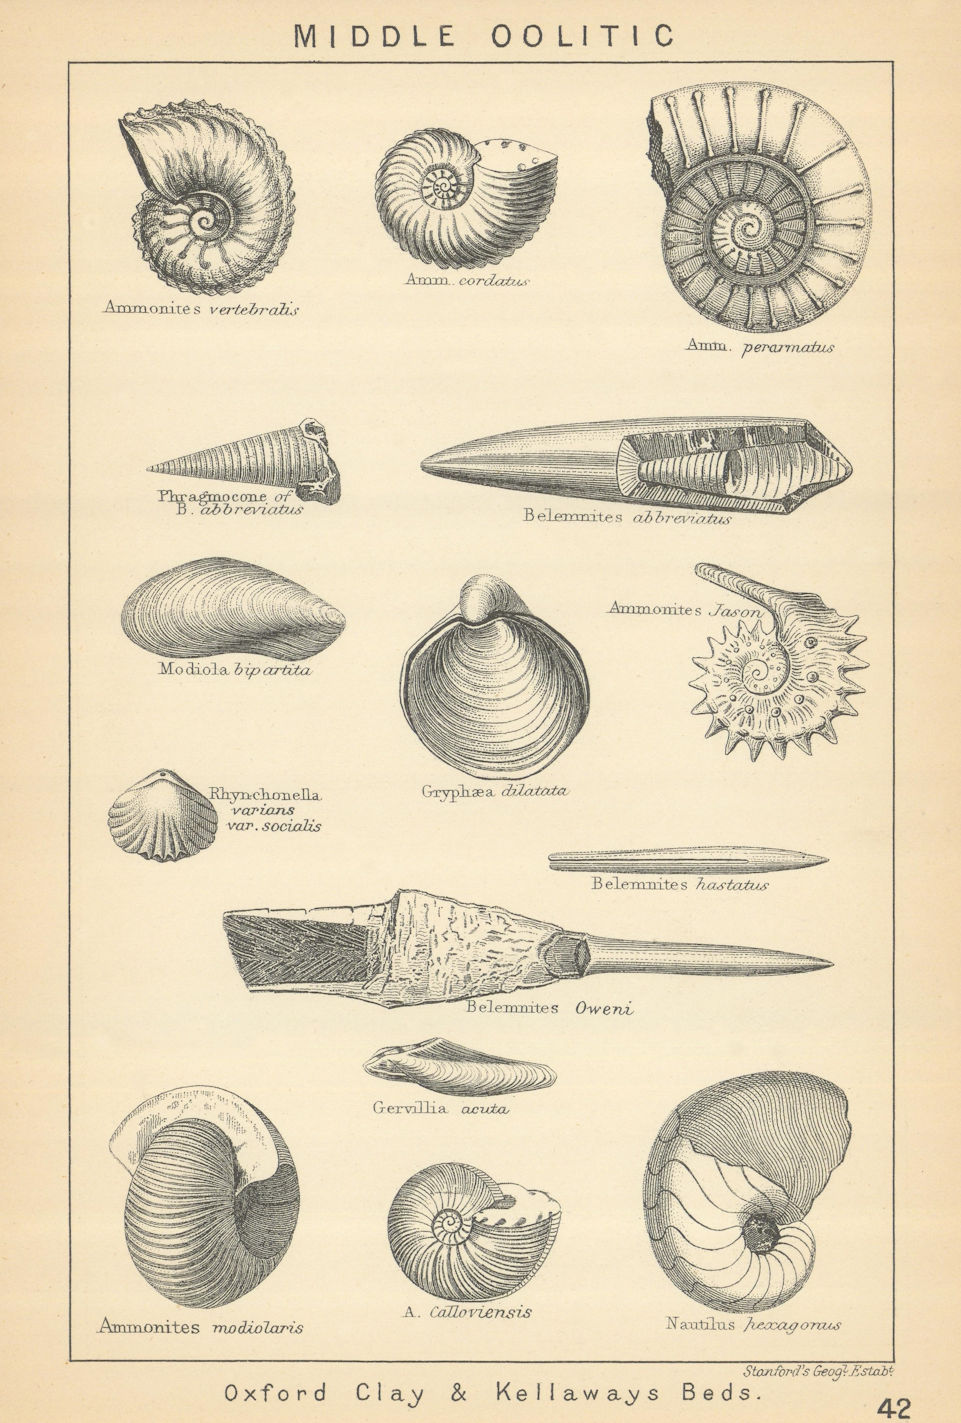 BRITISH FOSSILS. Middle Oolitic - Oxford Clay & Kellaways Beds. STANFORD 1904